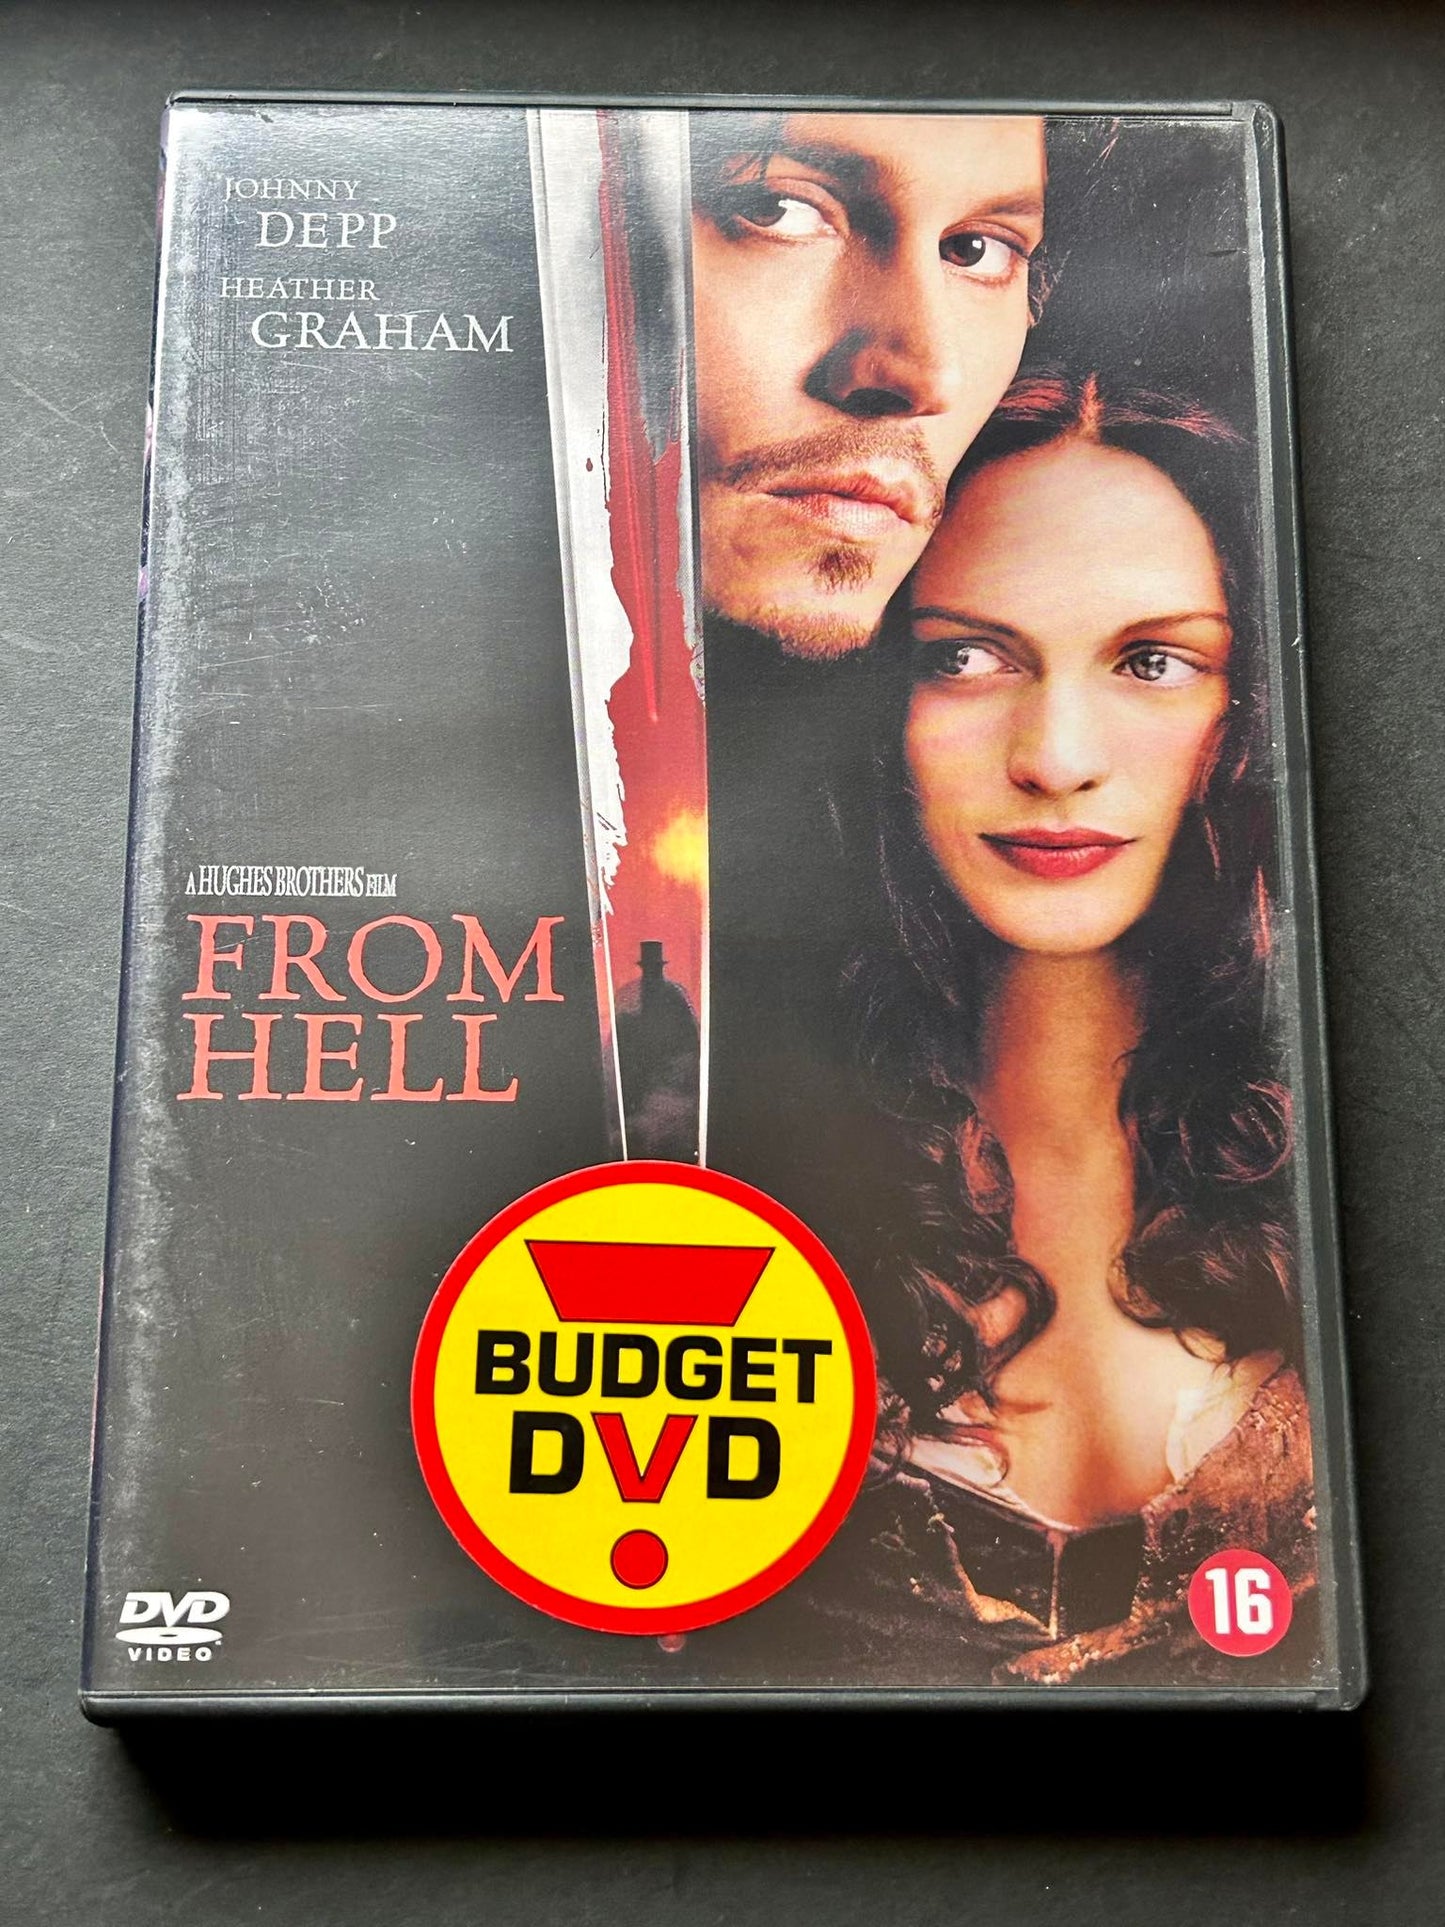 DvD From Hell